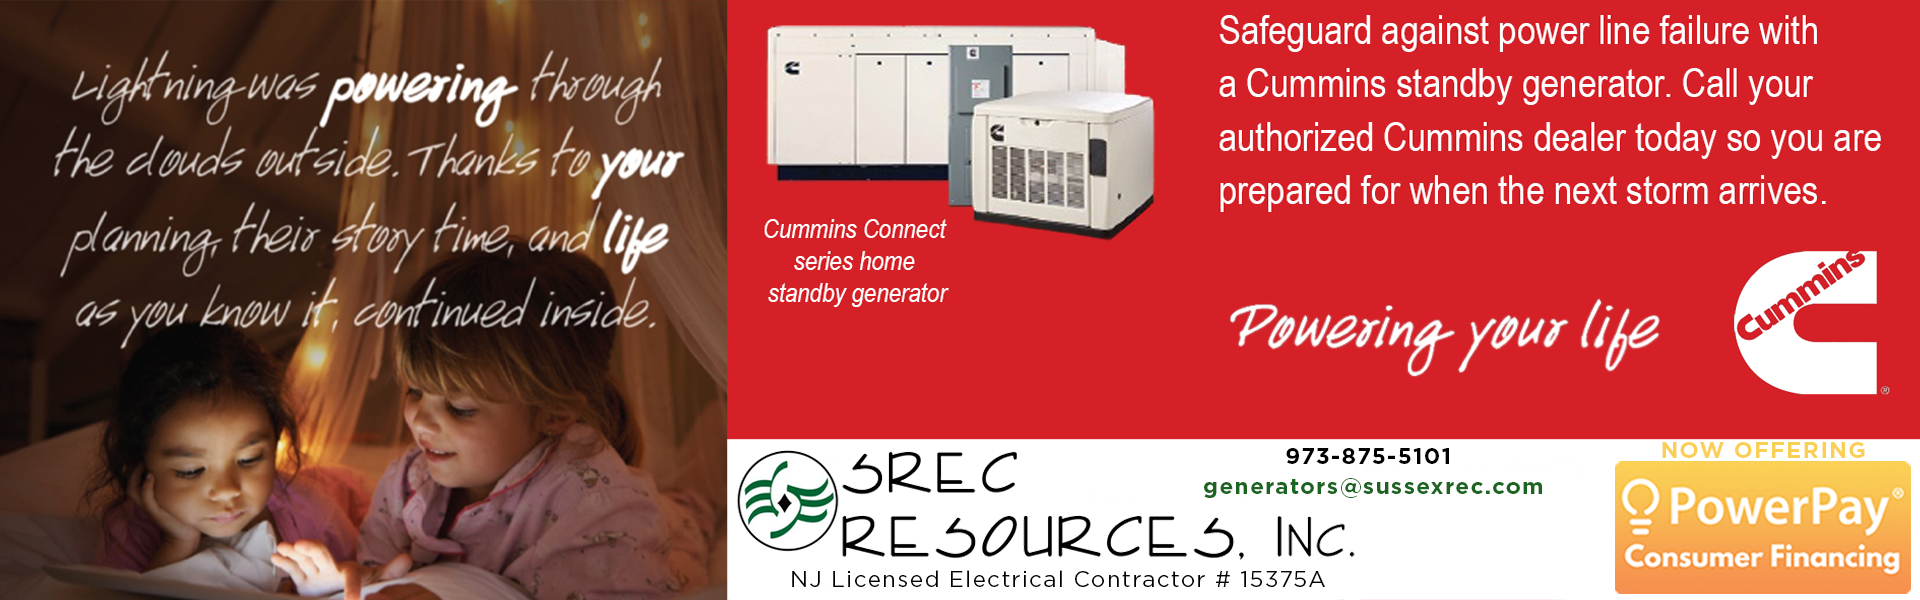 "Safeguard against power line failure with a Cummins standby generator. Call your authorized Cummins dealer today so you are prepared for when the next storm arrives. SREC Resources, Inc. (NJ licensed elec. contractor #15375A), 973-875-5101, generators@sussexrec.com